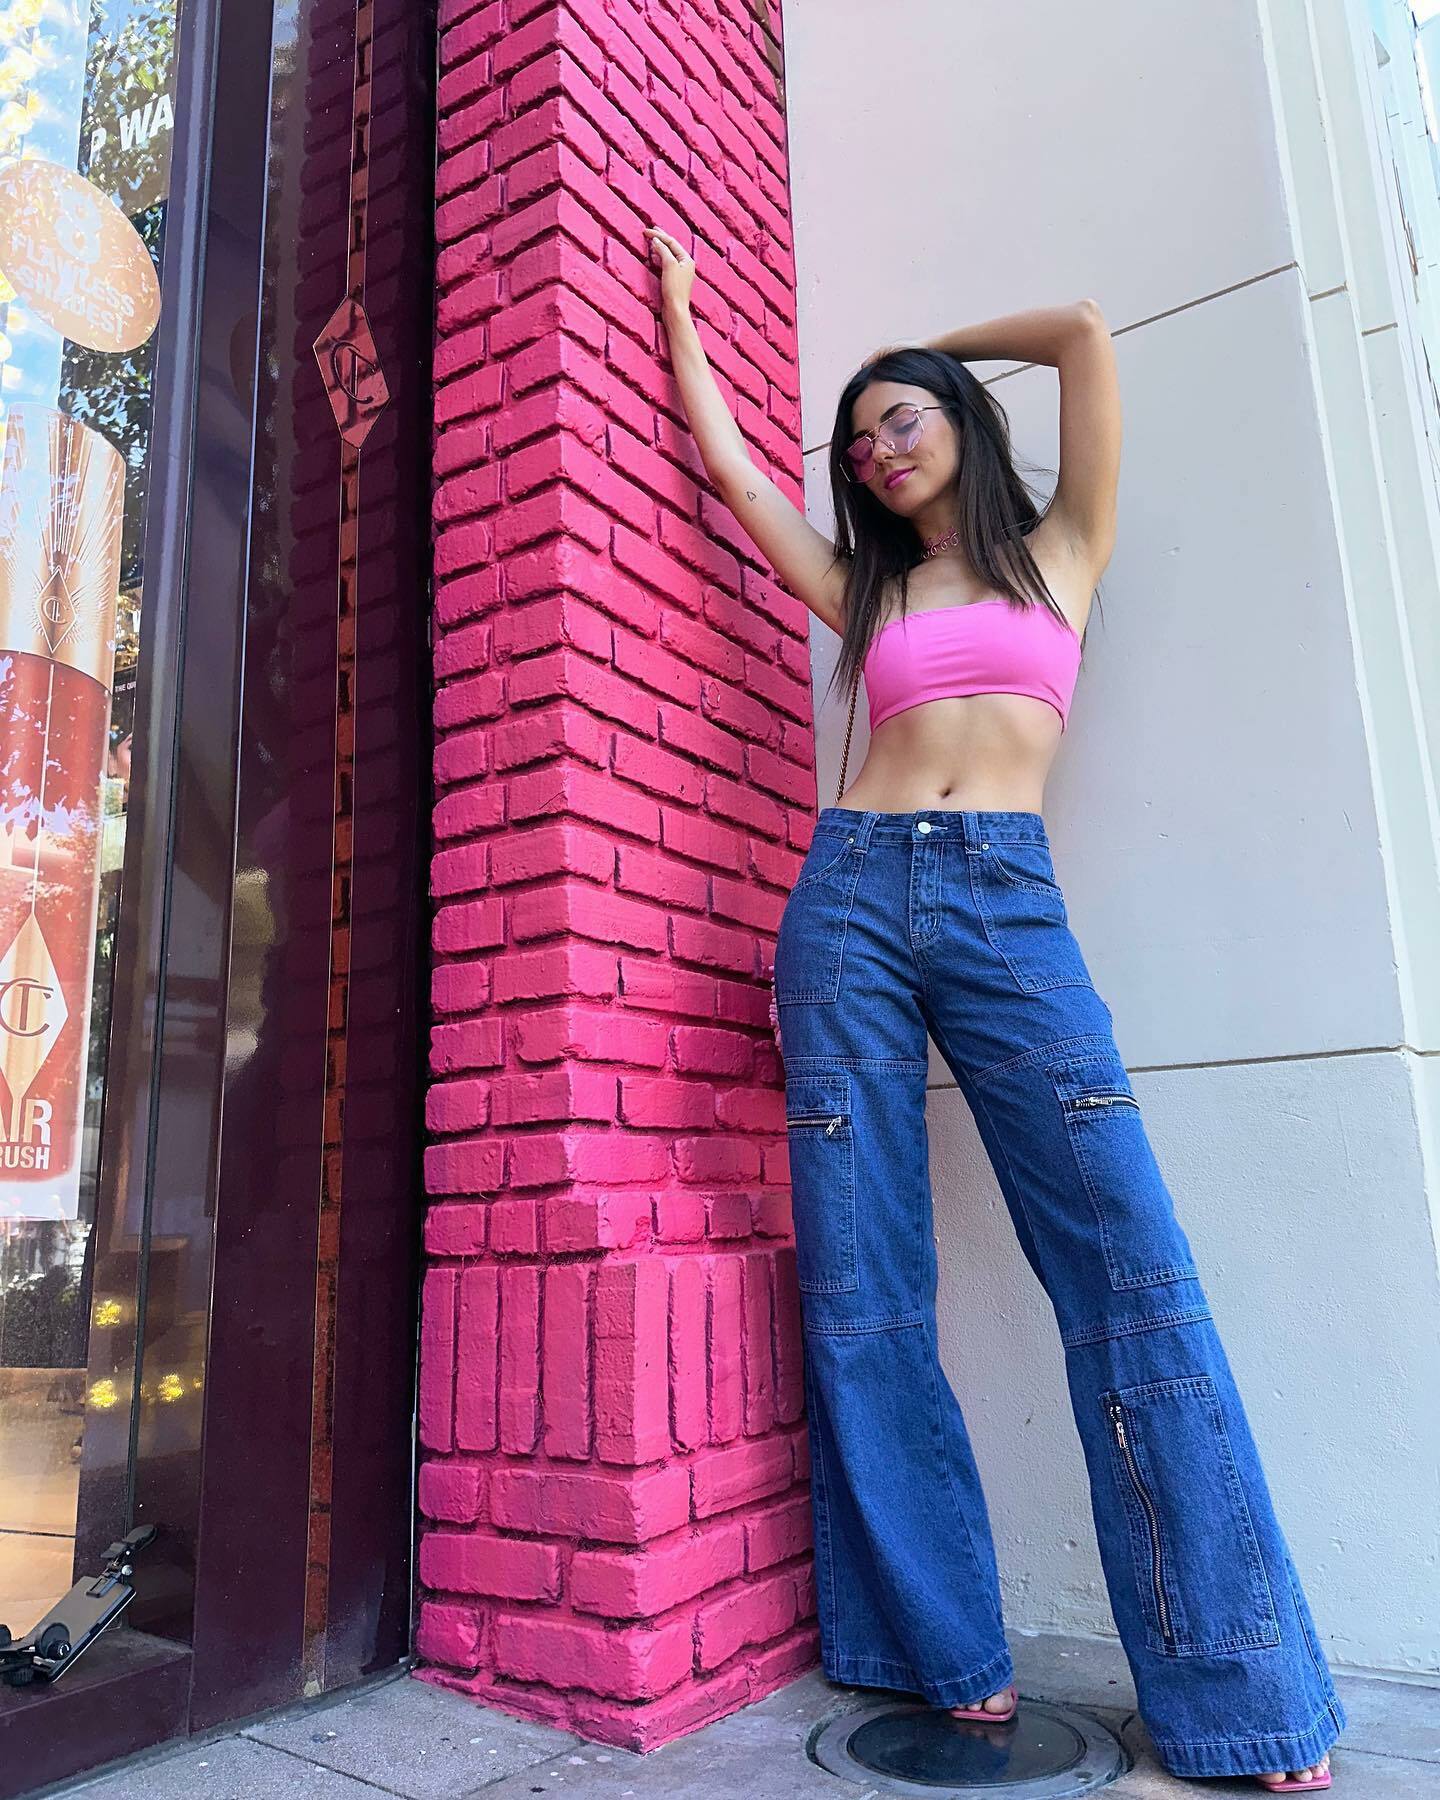 Photos n°2 : Victoria Justice Channels Her Inner Barbie Girl!